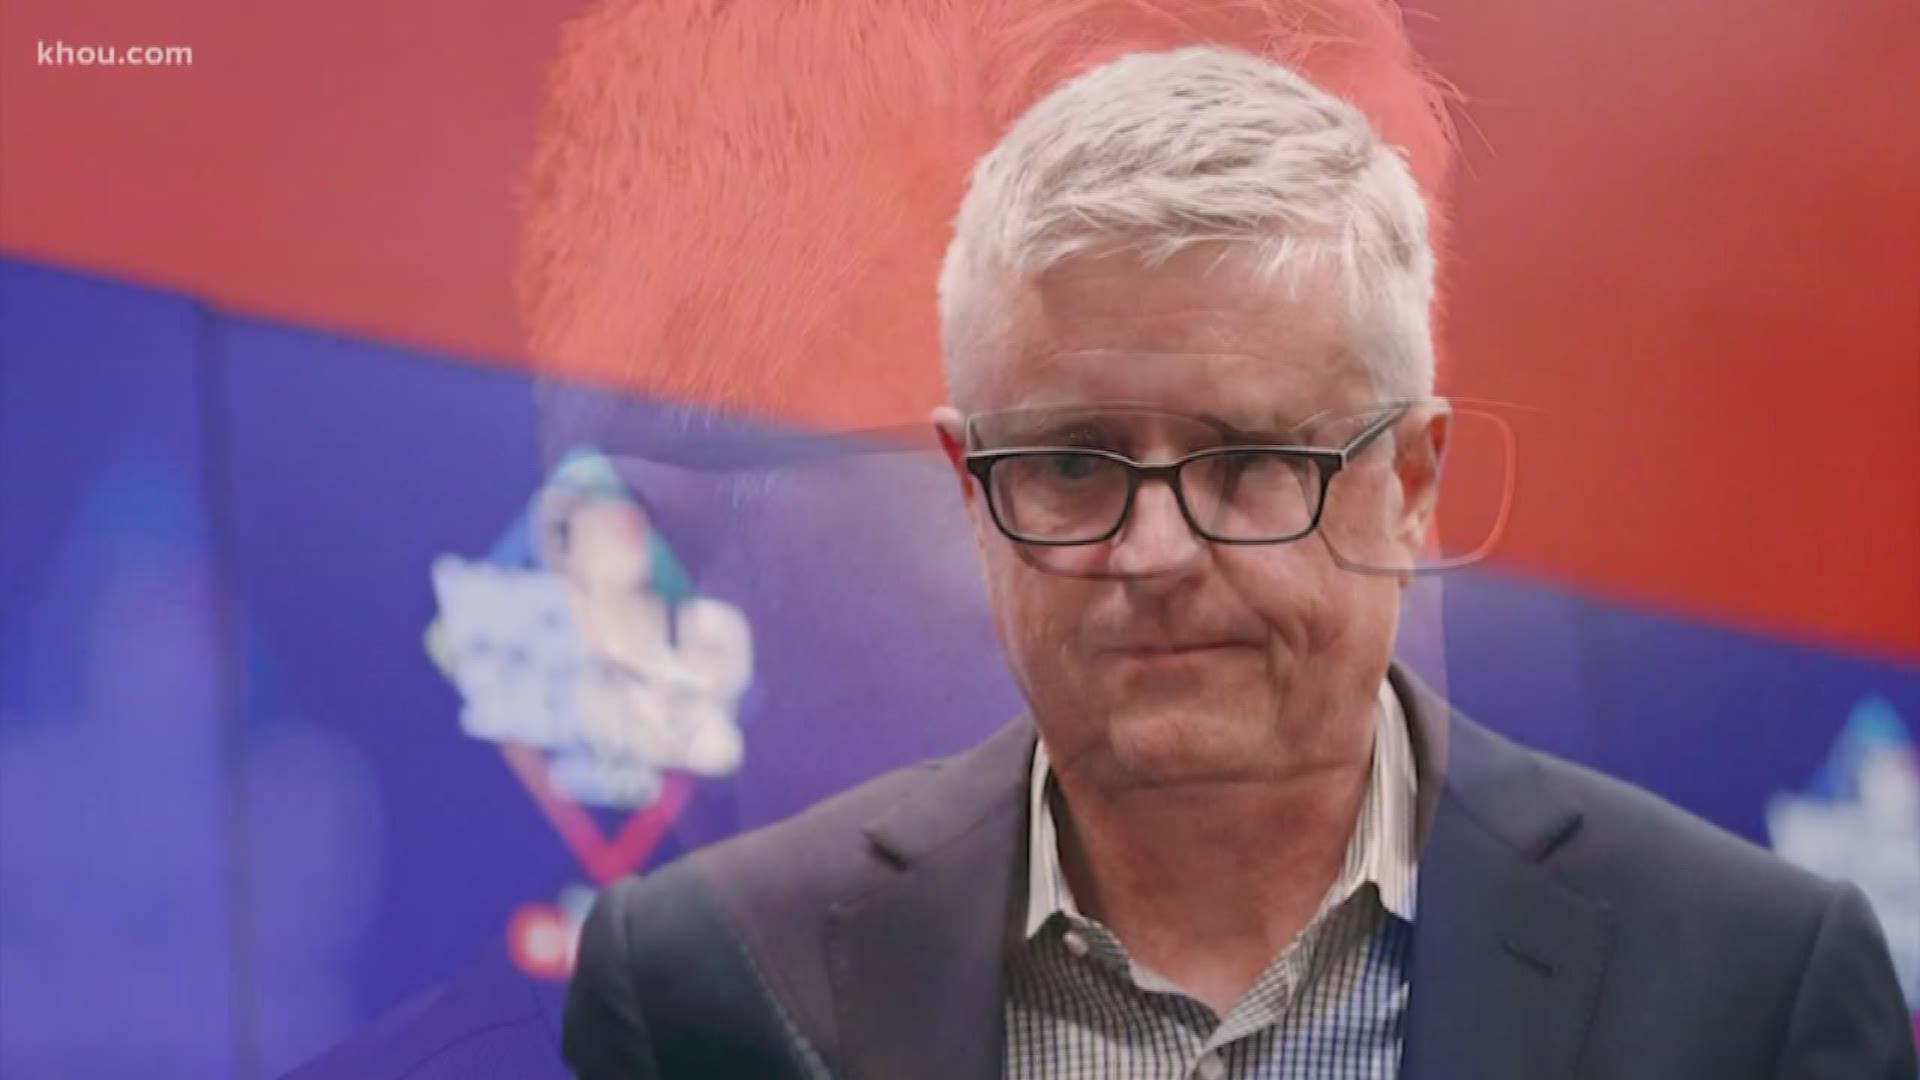 Former Astros general manager Jeff Luhnow previously denied knowing about the team’s sign-stealing tactics, but a Wall Street Journal article suggests otherwise.